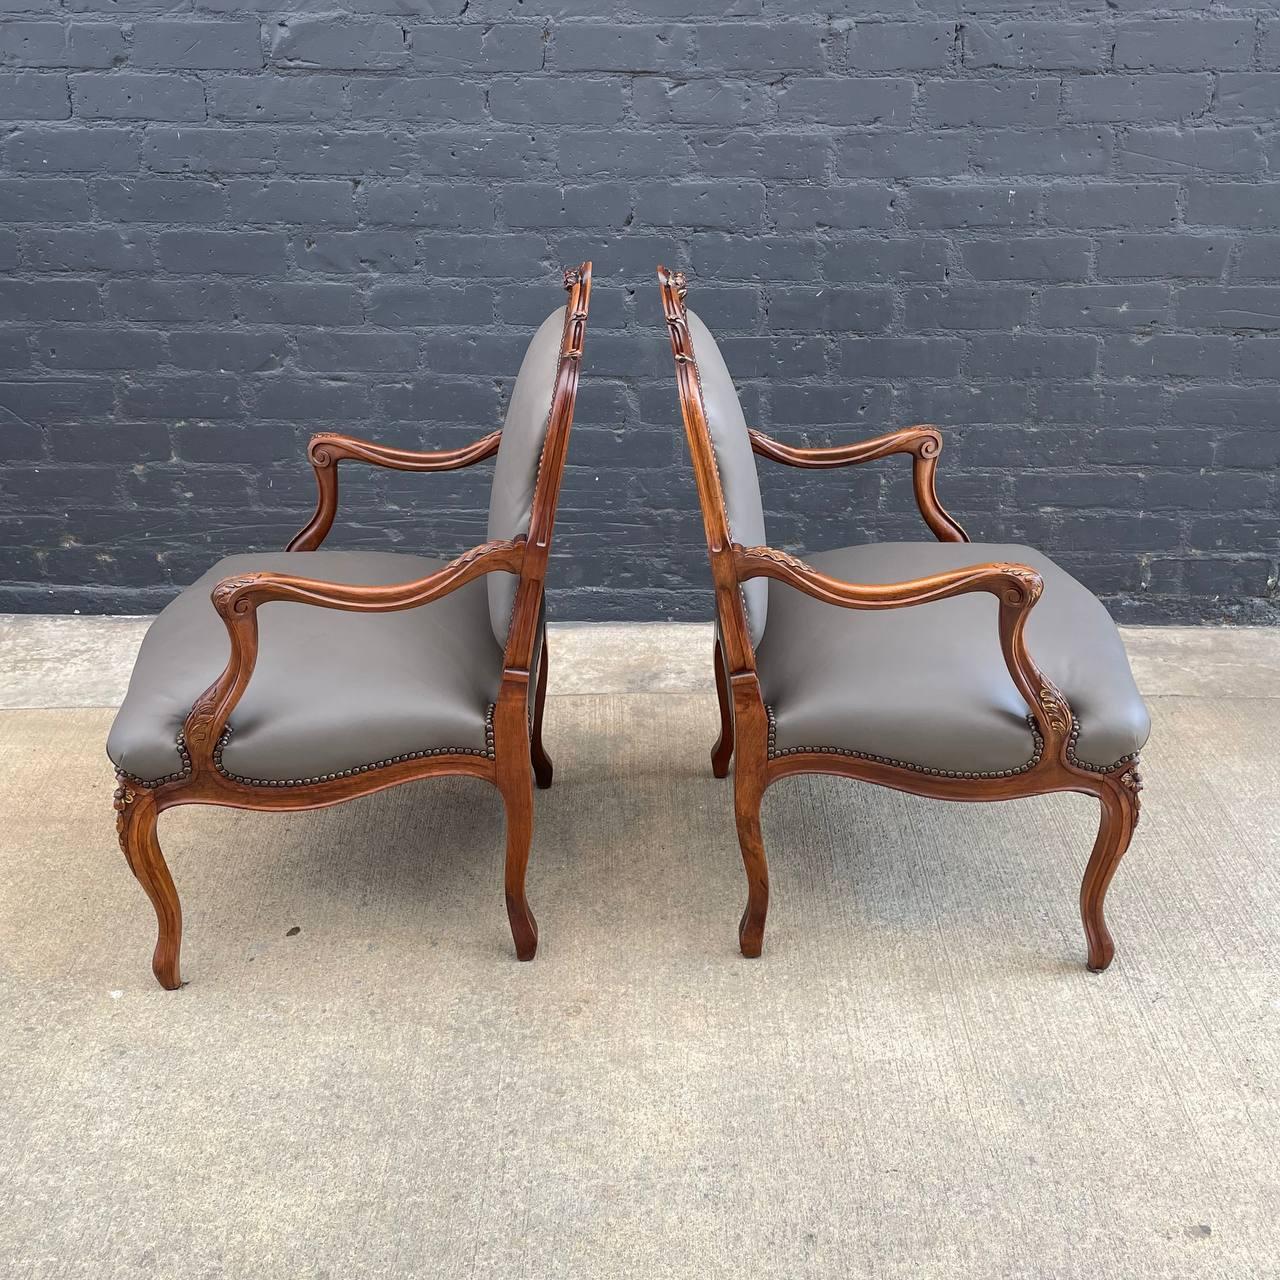 Pair of Antique French Louis XVI Carved Wood & Leather Arm Chairs In Good Condition For Sale In Los Angeles, CA